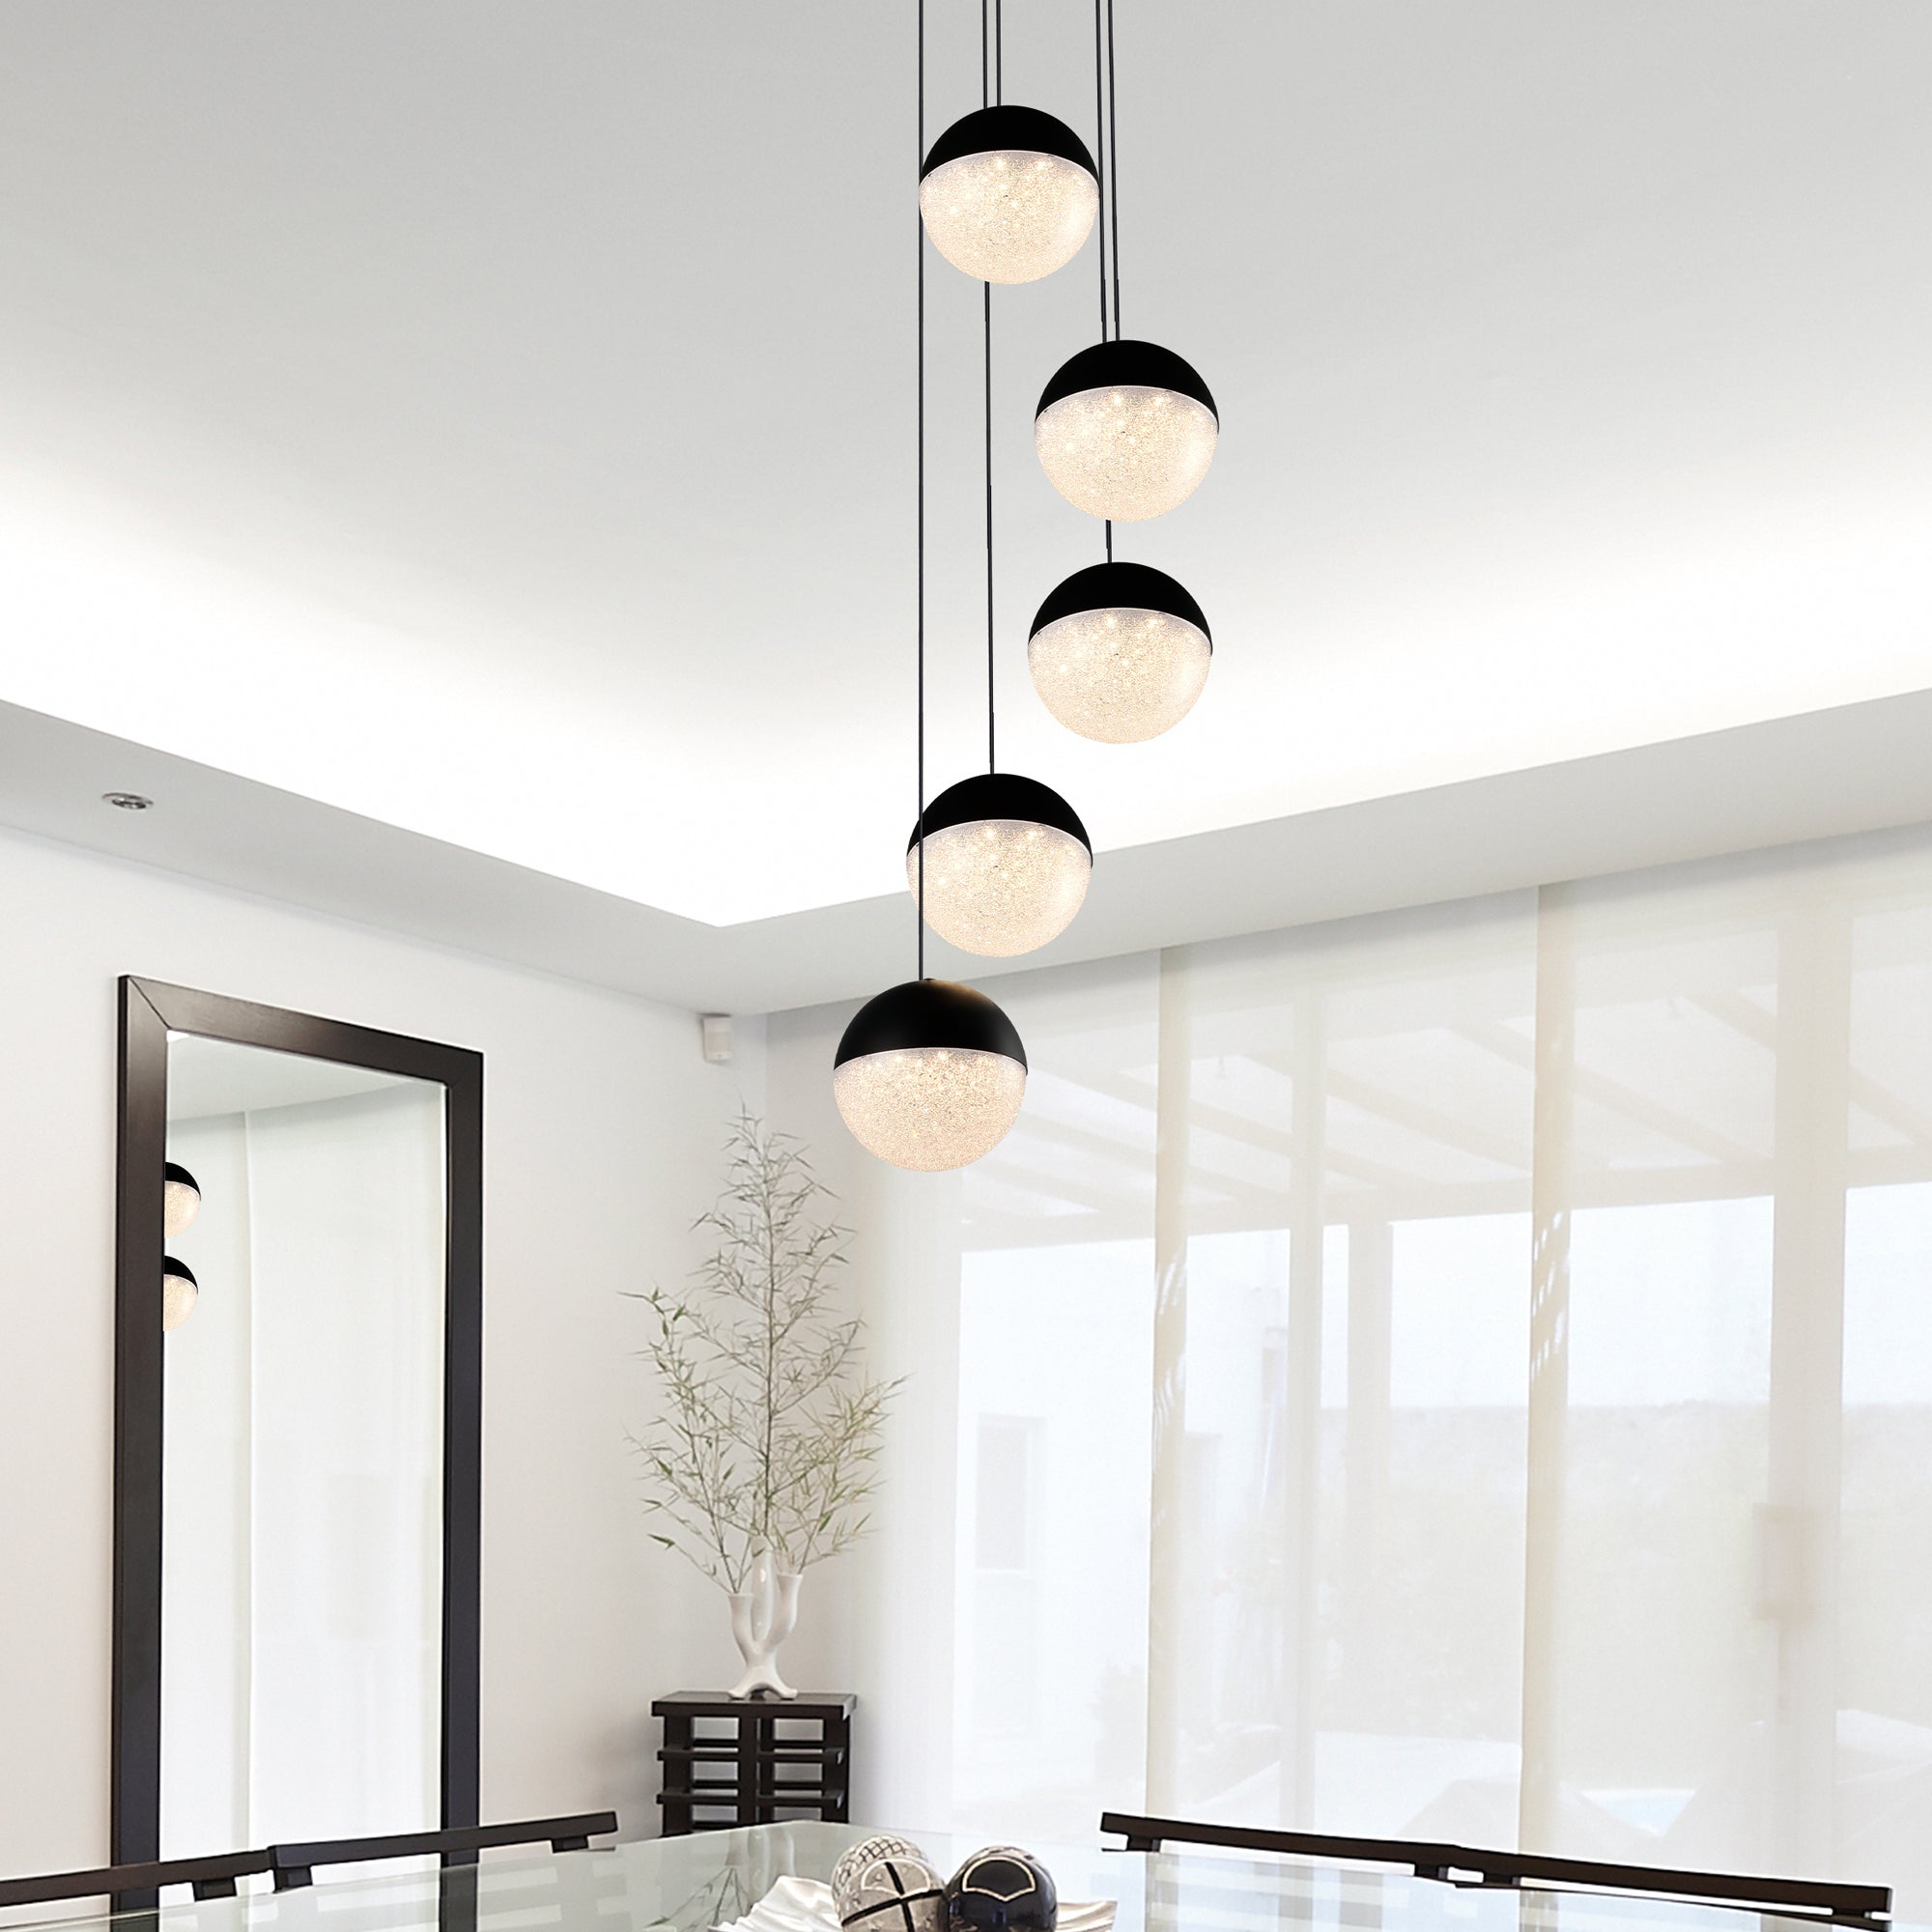 Vonn Ravello 5-Light VAC3285BL Integrated LED Chandelier with Globe Shades in Black